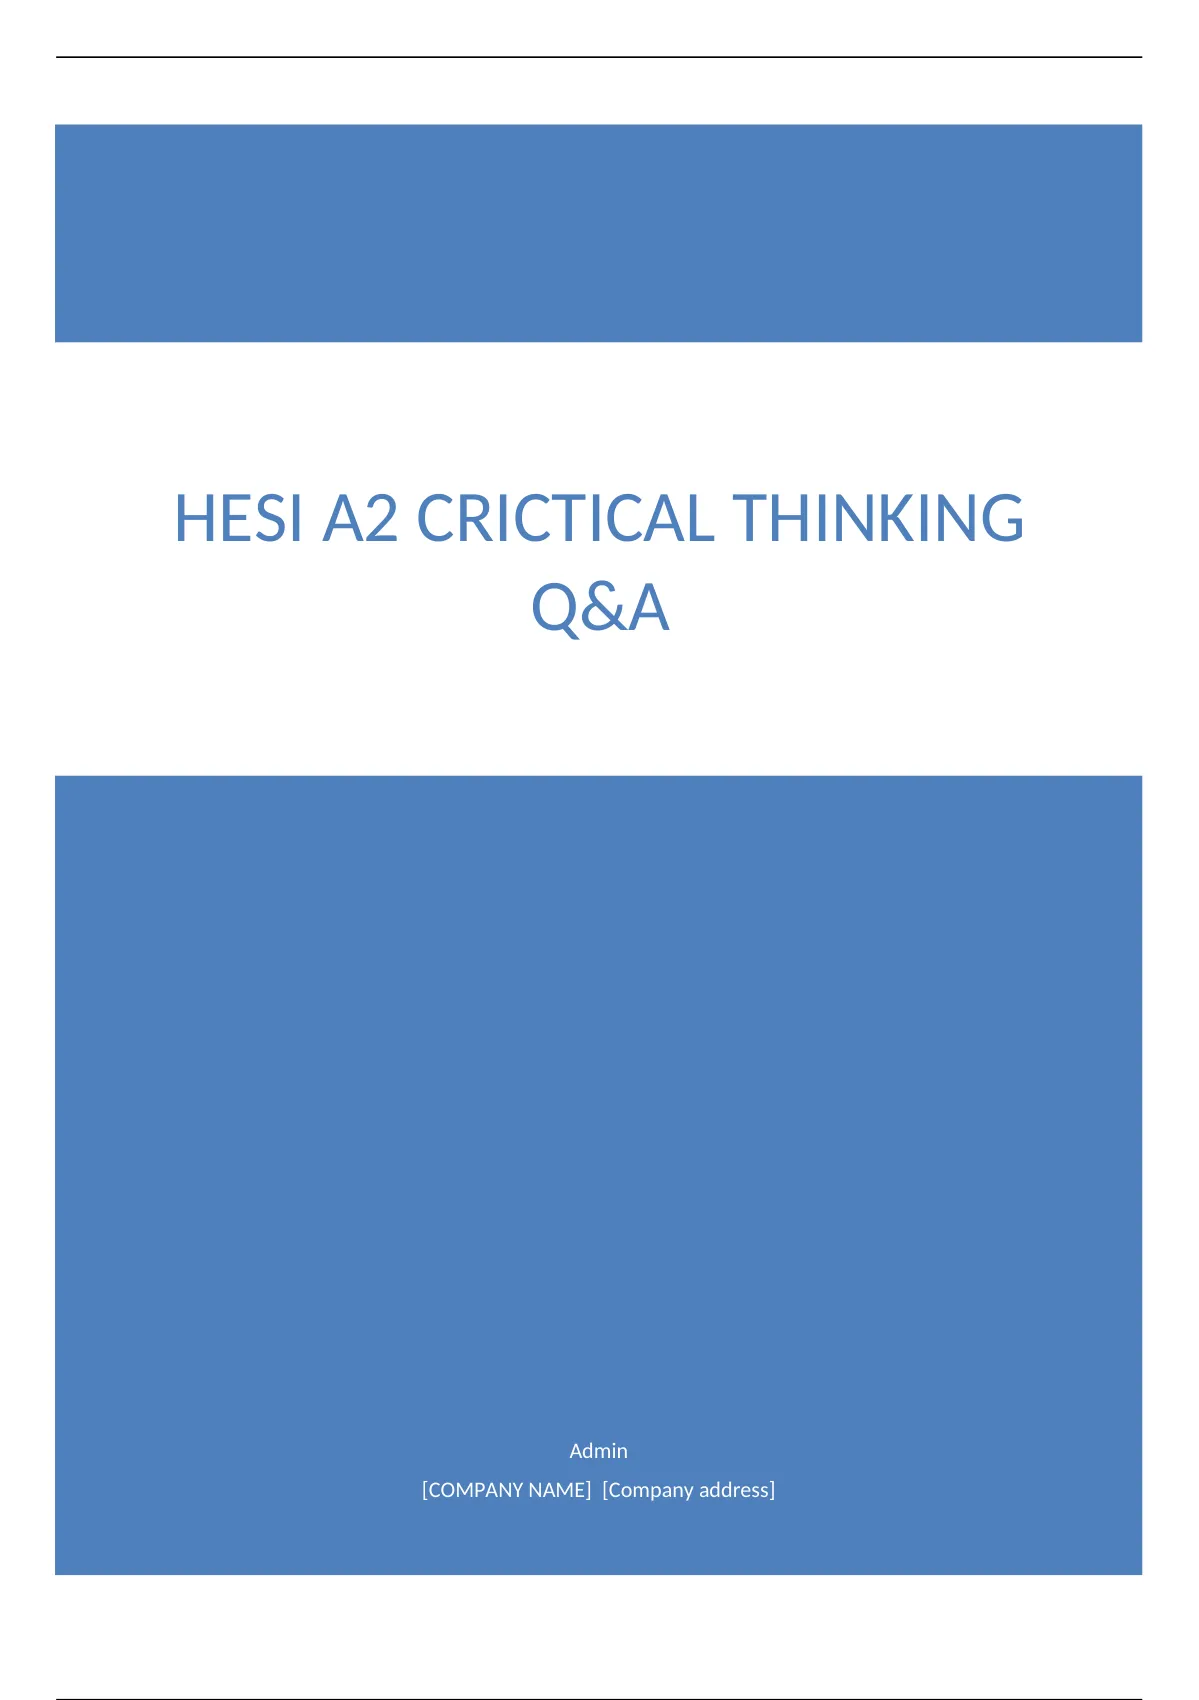 critical thinking questions hesi a2